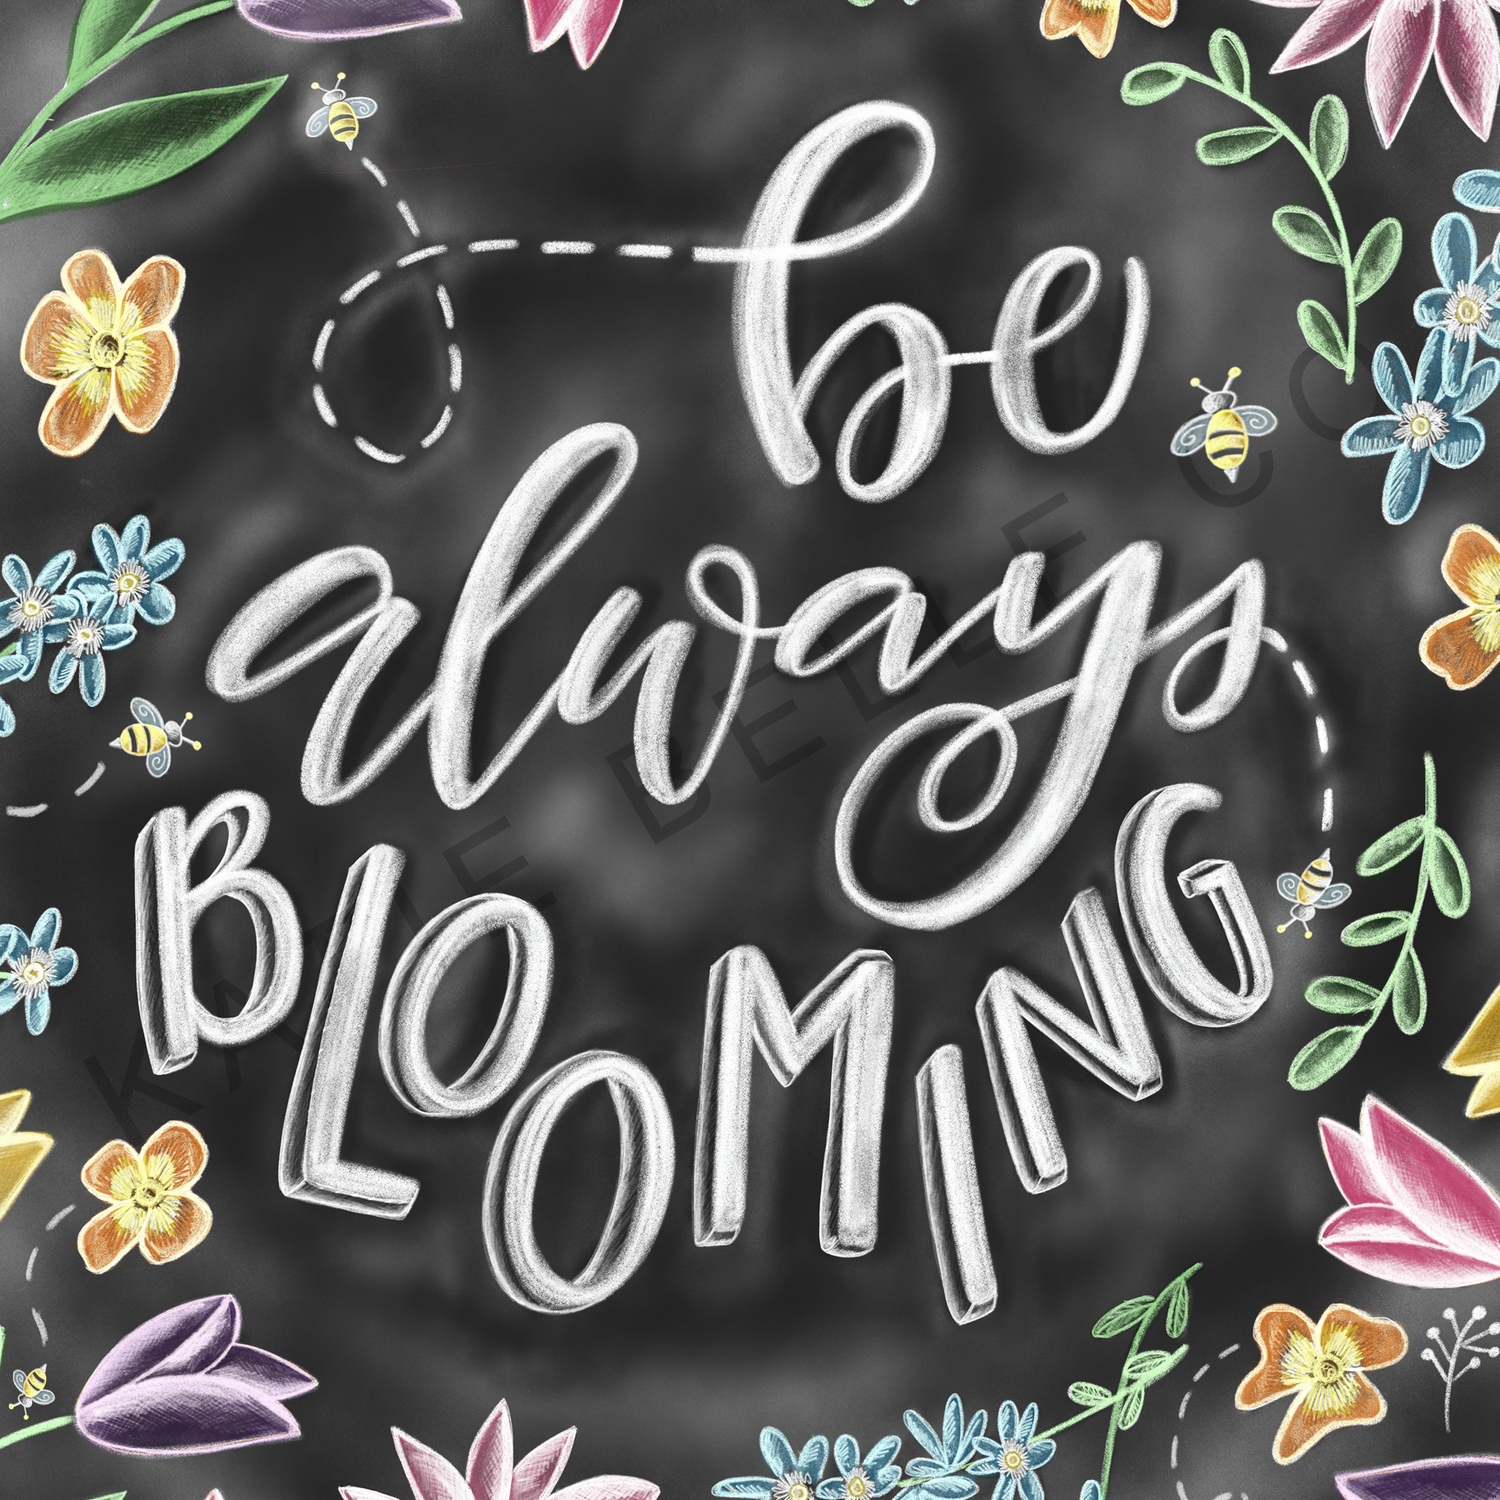 Be always blooming. Chalkboard print. Chalk Art. Bright spring flowers. Bees buzzing. Inspirational art. Spring Decor. Easter Decor. Easter gift. Spring Artwork. Hand drawn illustration. flowers surrounding text. Katie Belle Co. 